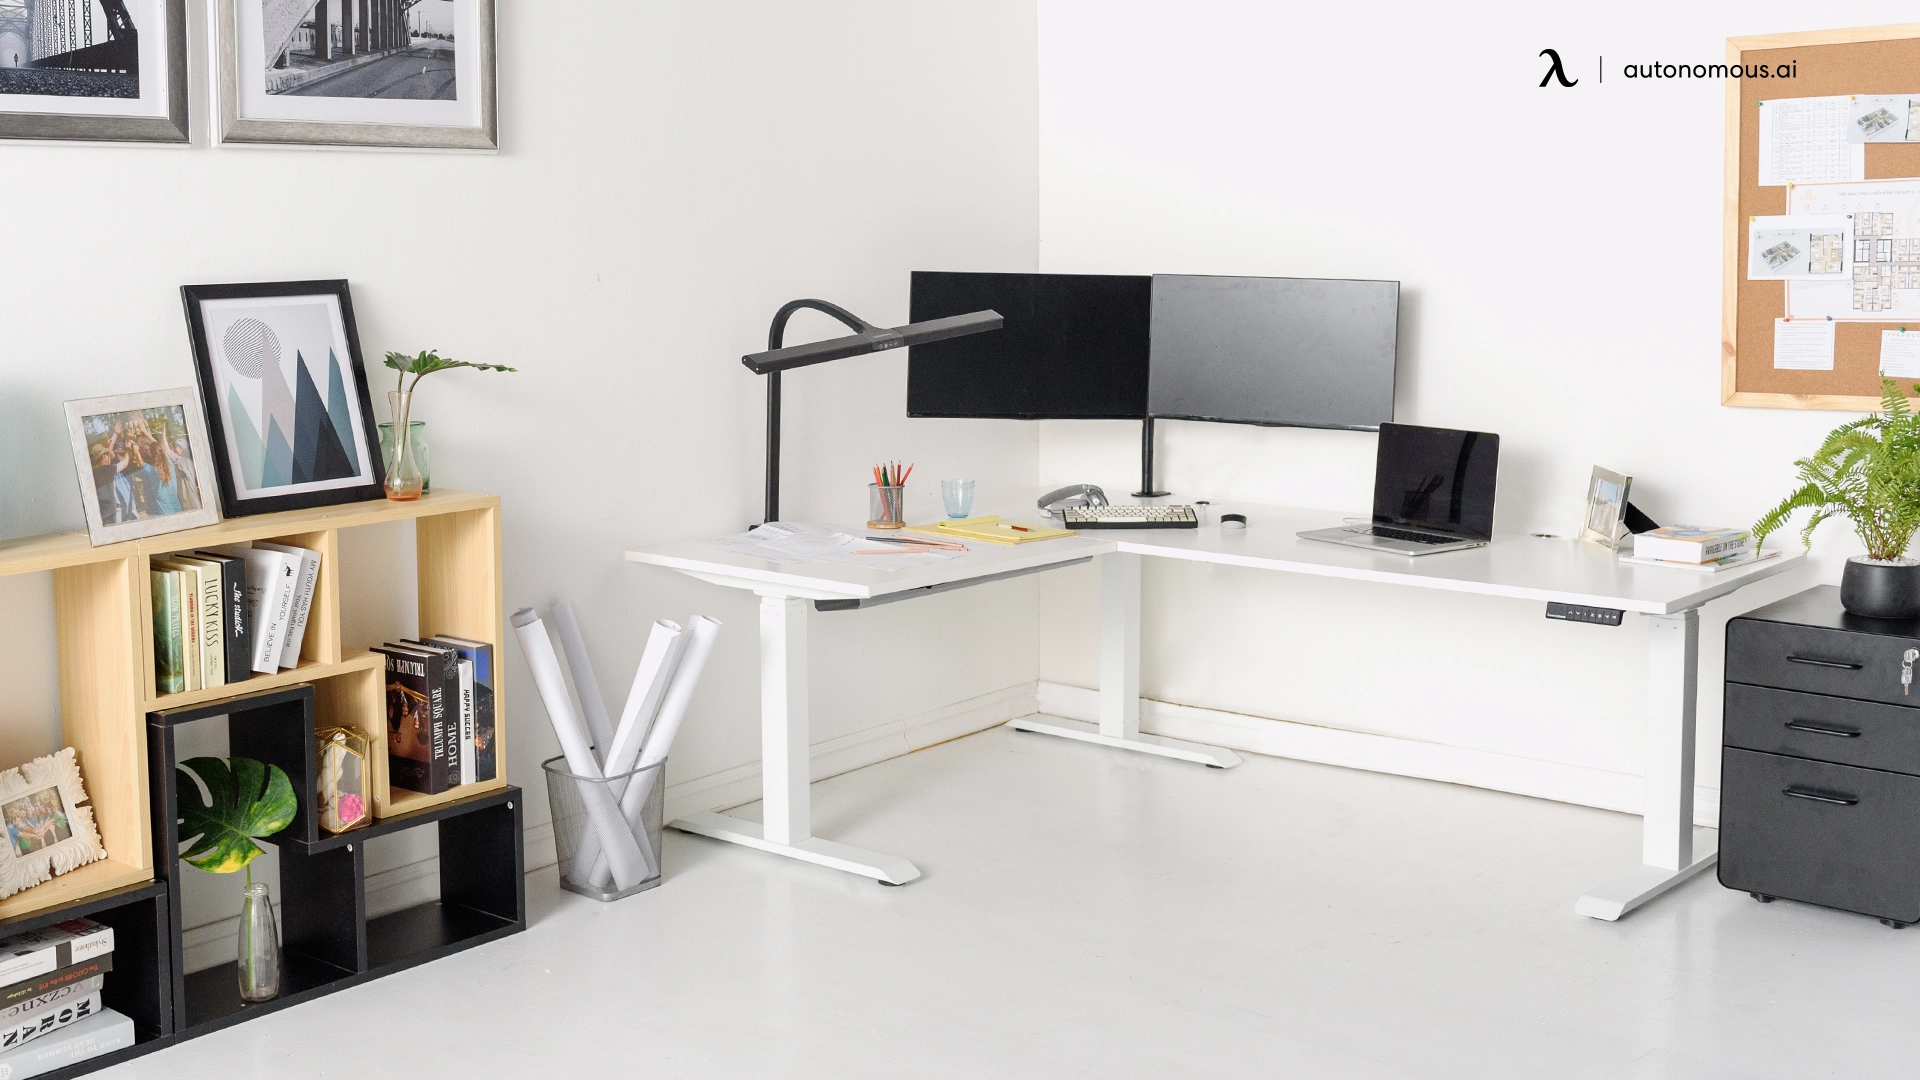 What Are the Benefits of a Modern L-shaped Desk?